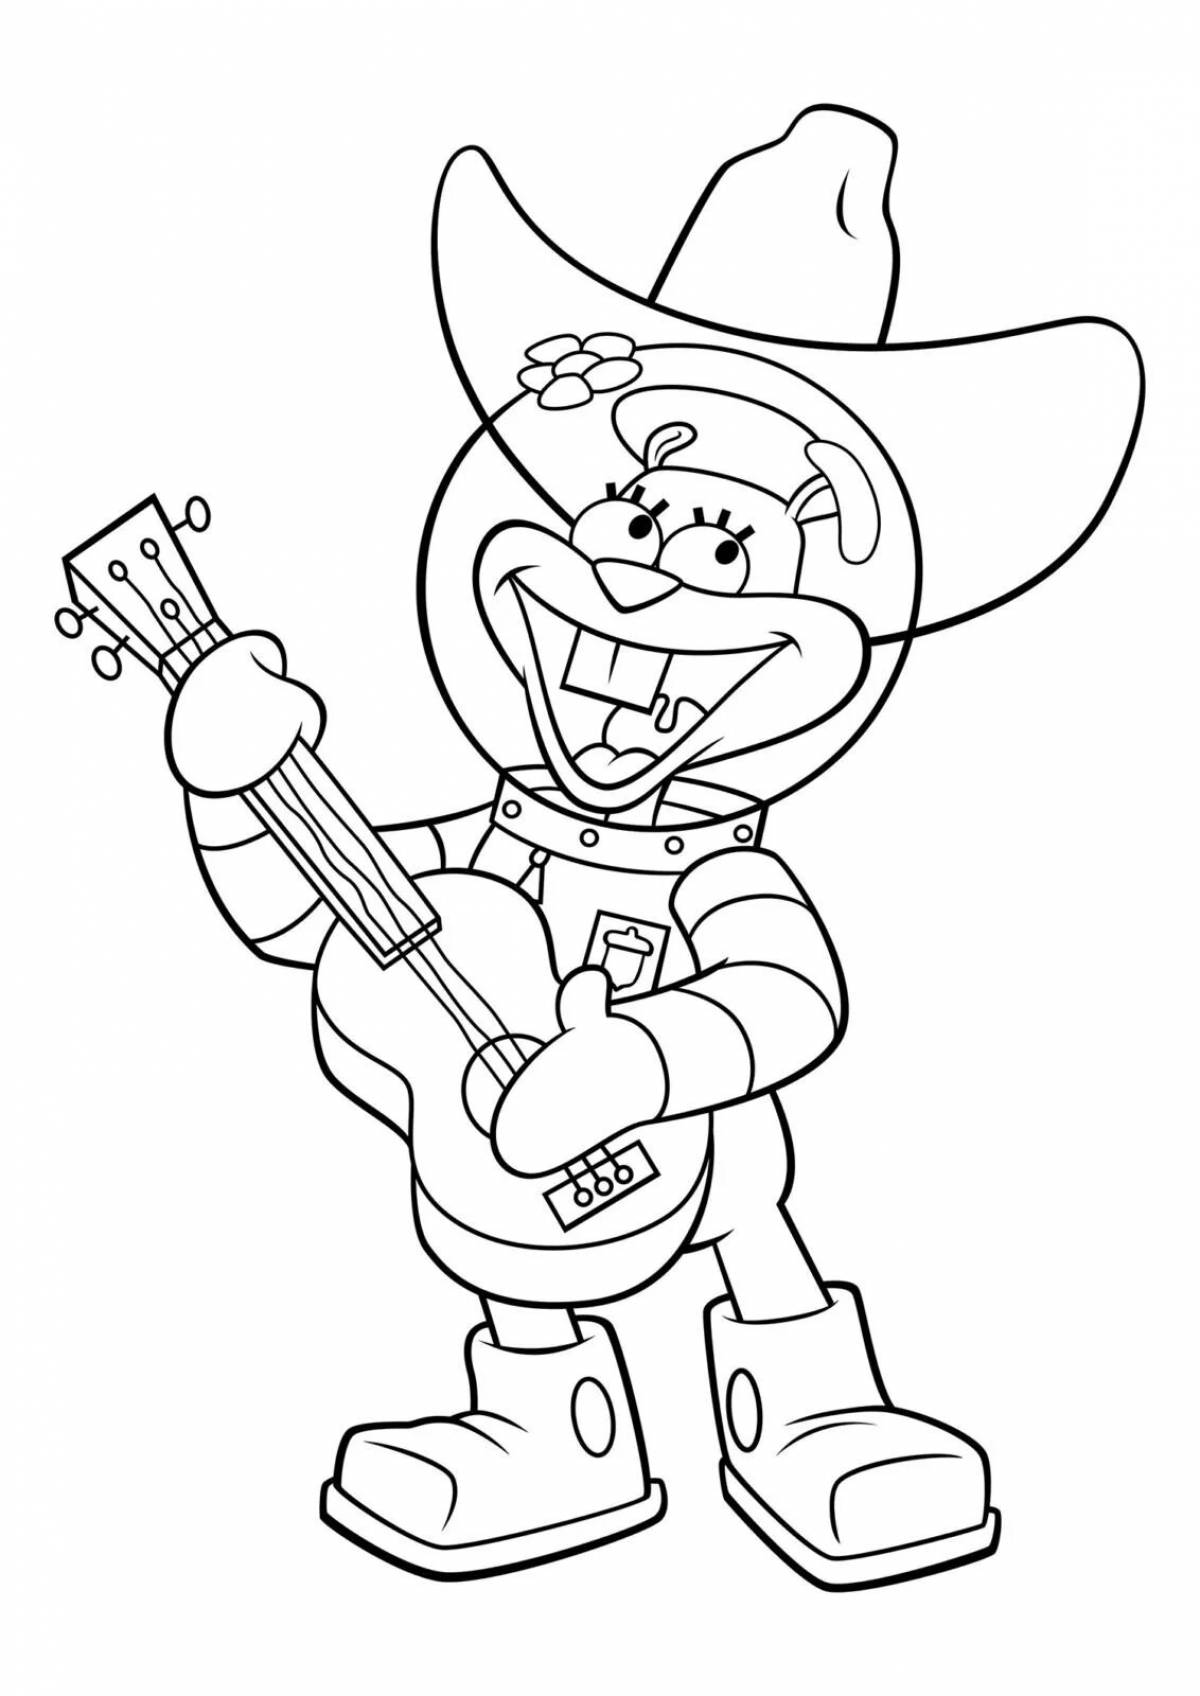 Coloring page witty sandy chicks